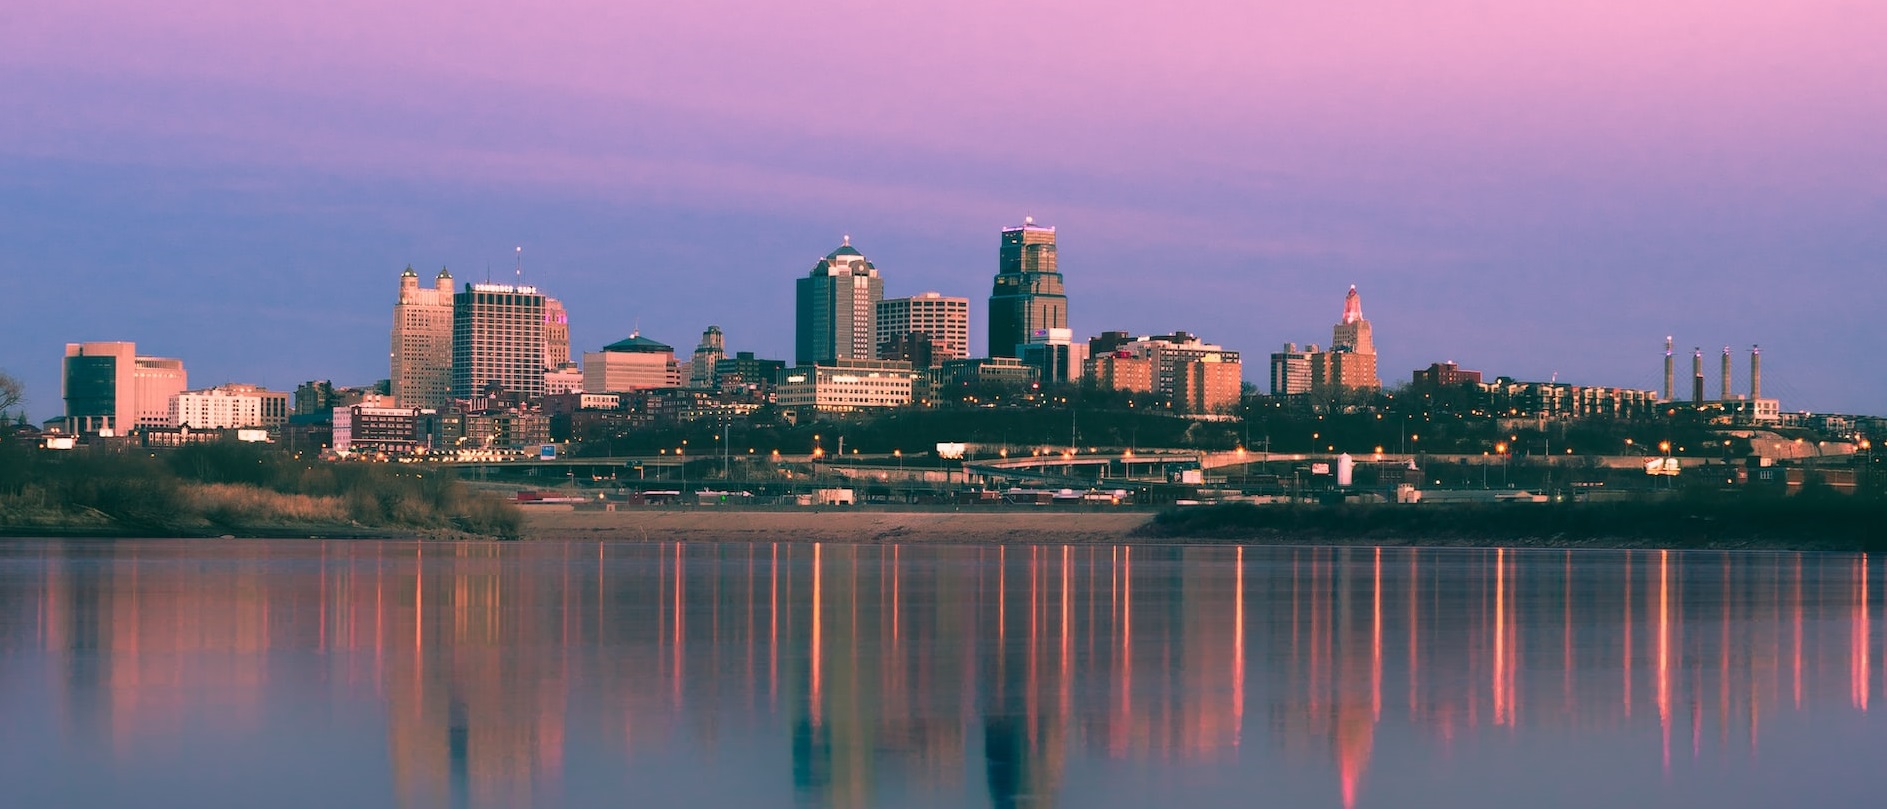 Pink nightsky in Kansas City | Breast Cancer Car Donations